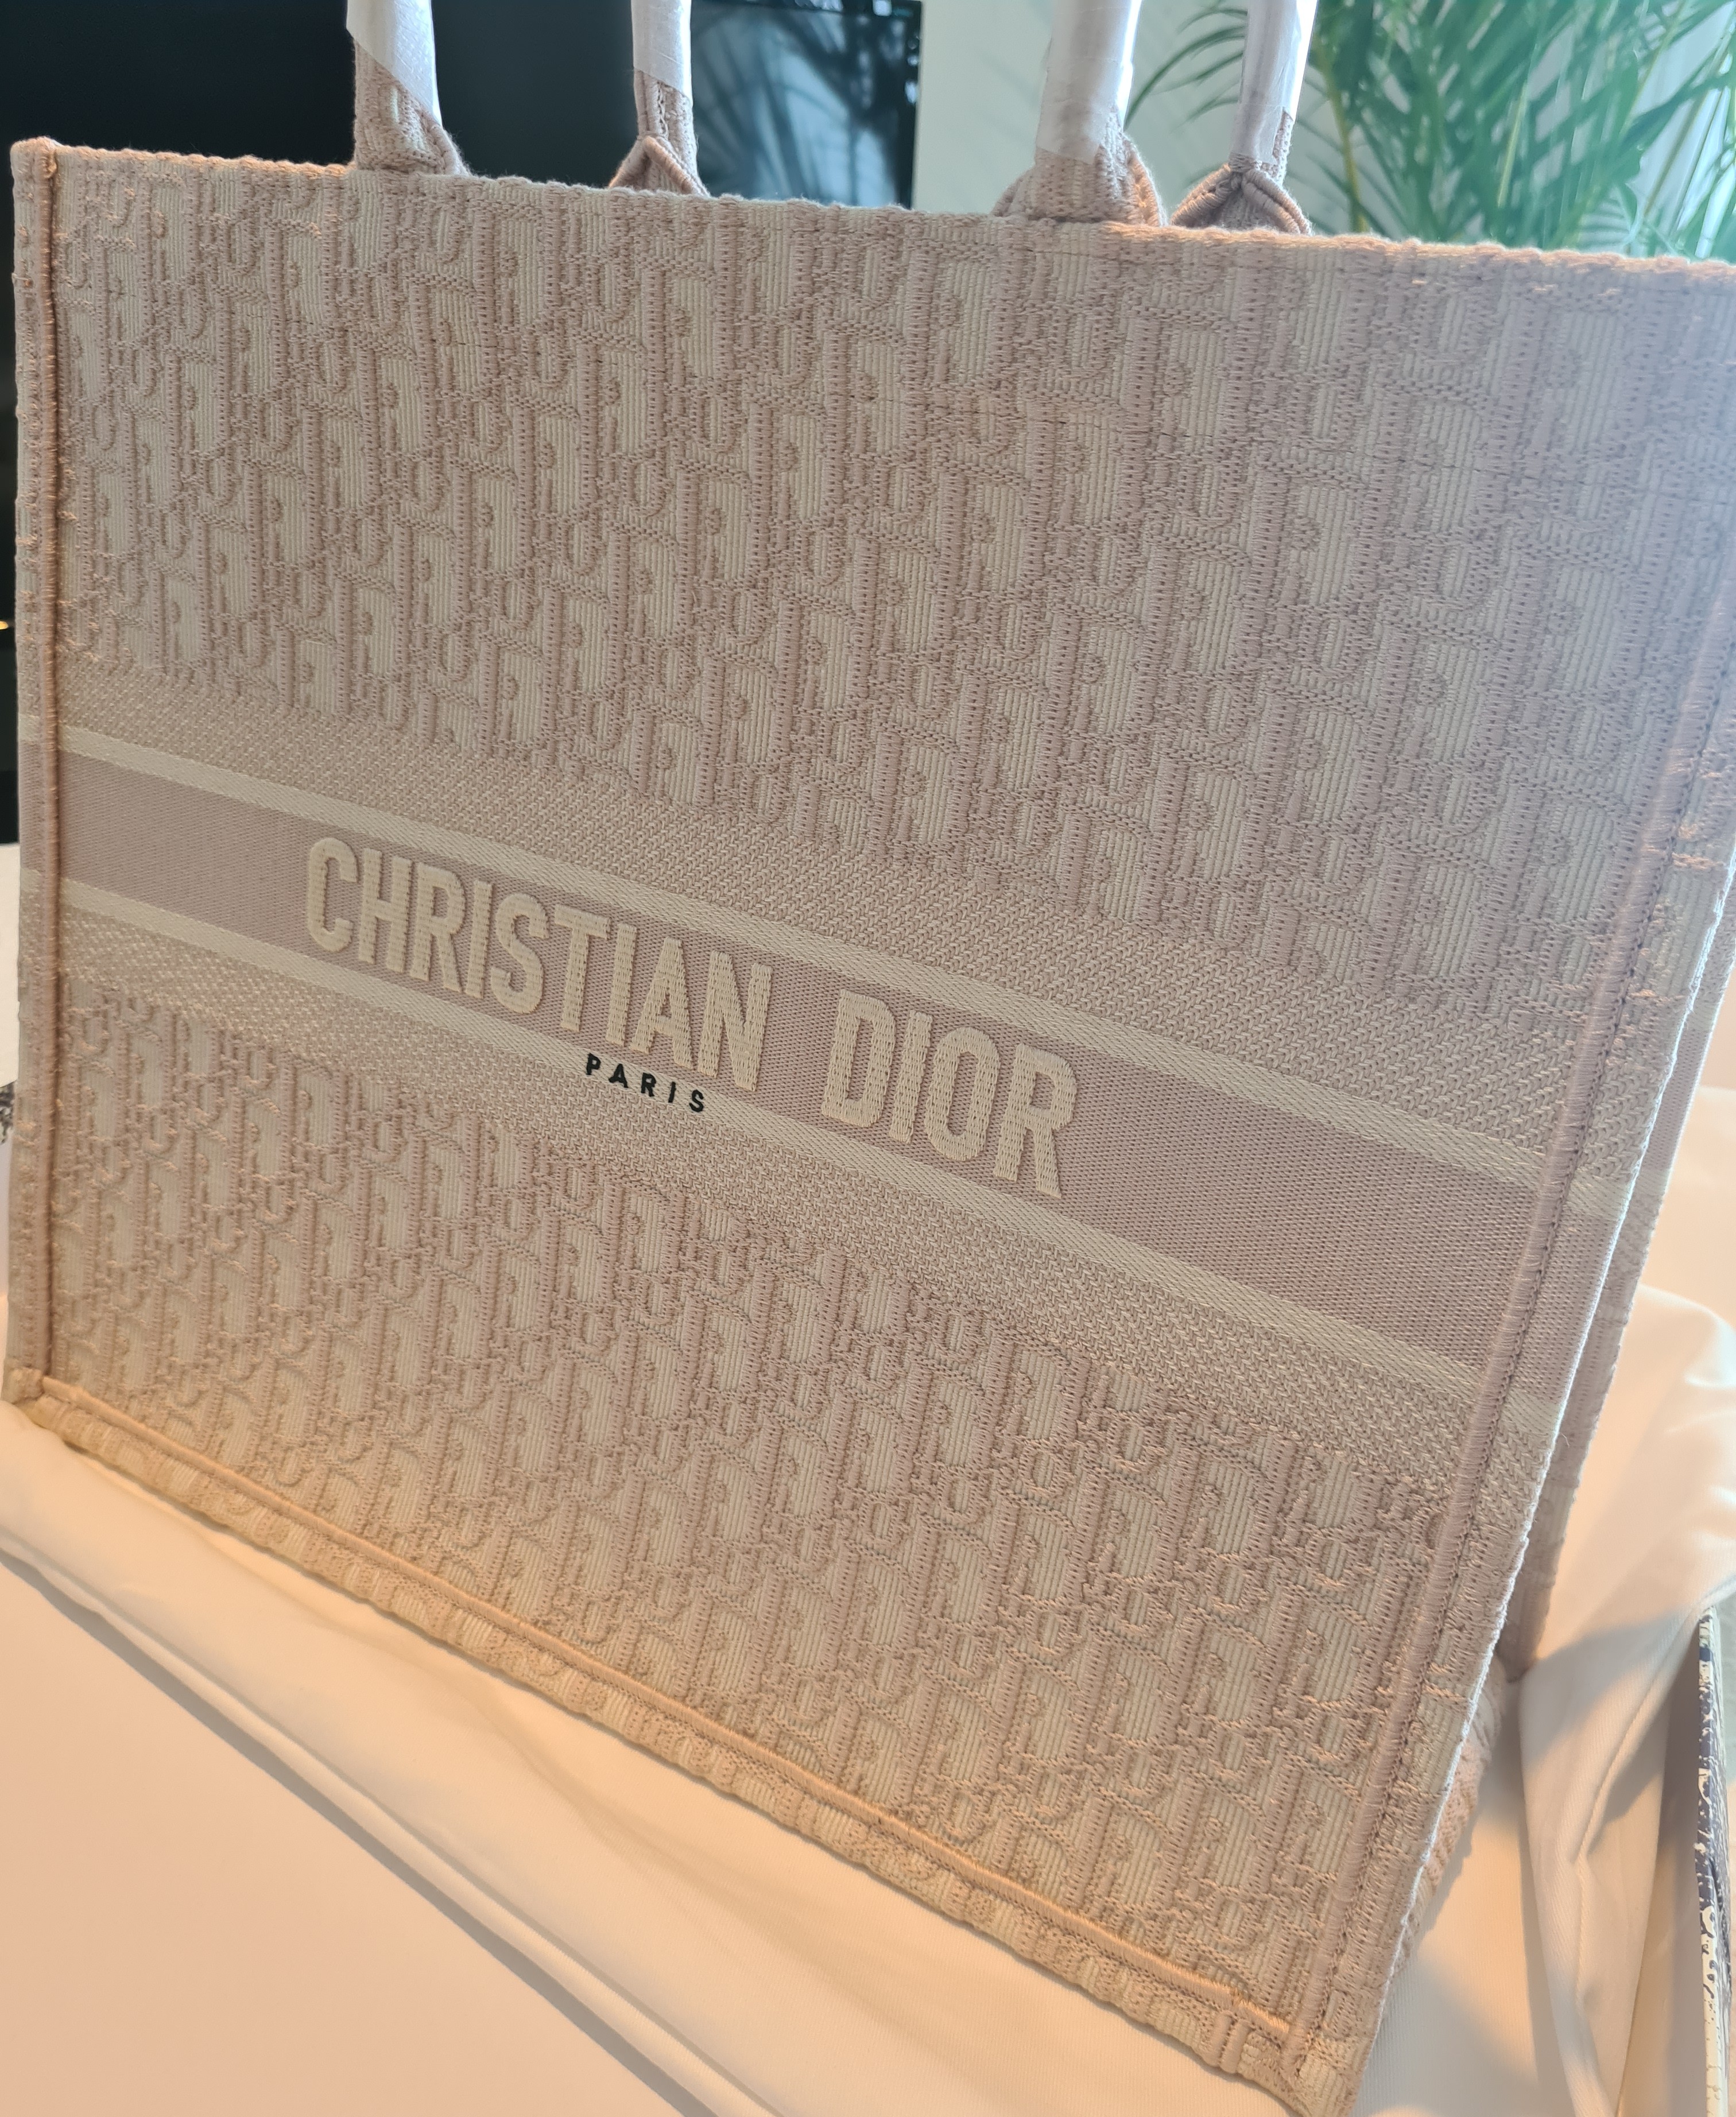 Hi guys, im completely new to the replica bags, and reddit as well. Have  seen some good bags in dhgate. I want to buy a very good replica of dior  book tote